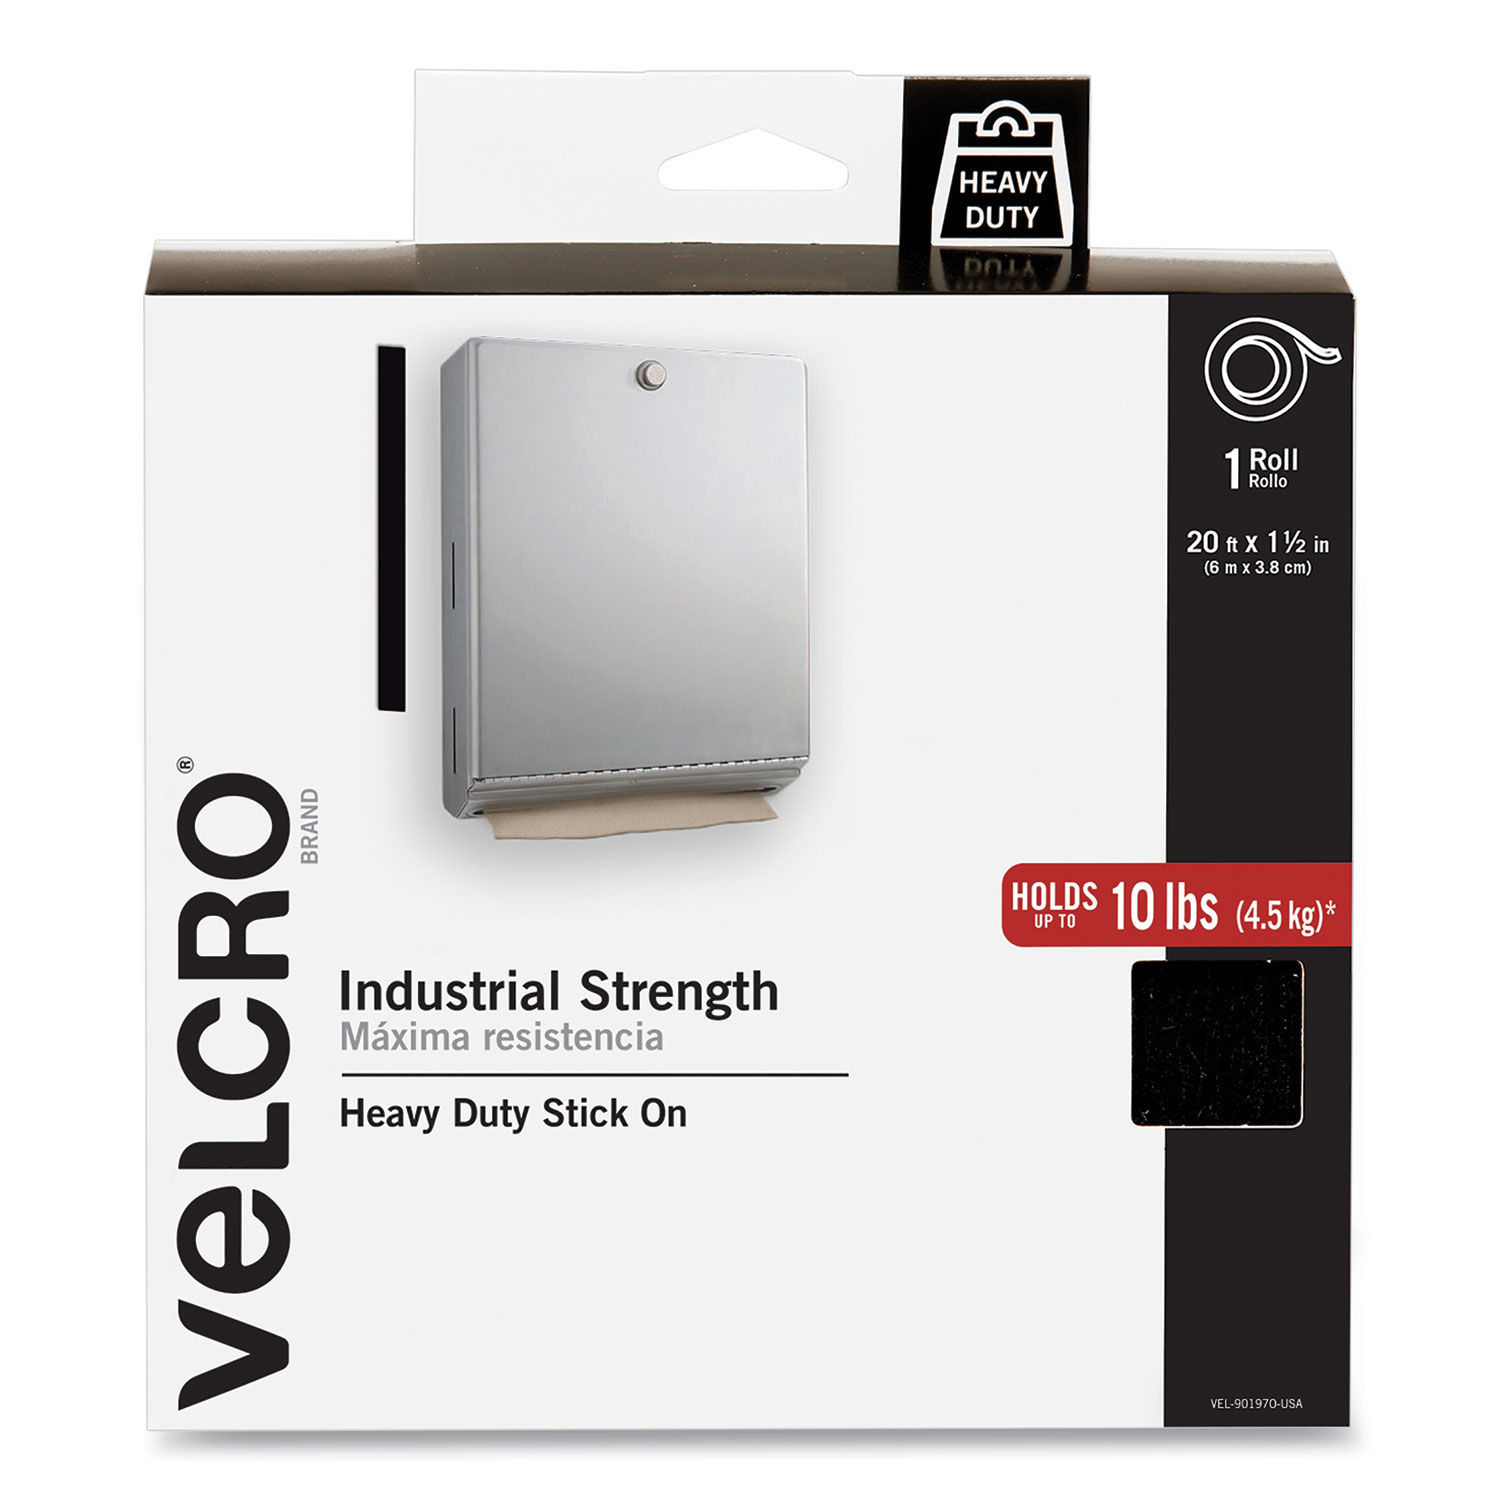  VELCRO Brand Extreme Outdoor Heavy Duty Tape, 4Ft x 1 In, Holds 15 lbs, Titanium, Industrial Strength Adhesive Backed Hook and Loop  Fasteners Roll